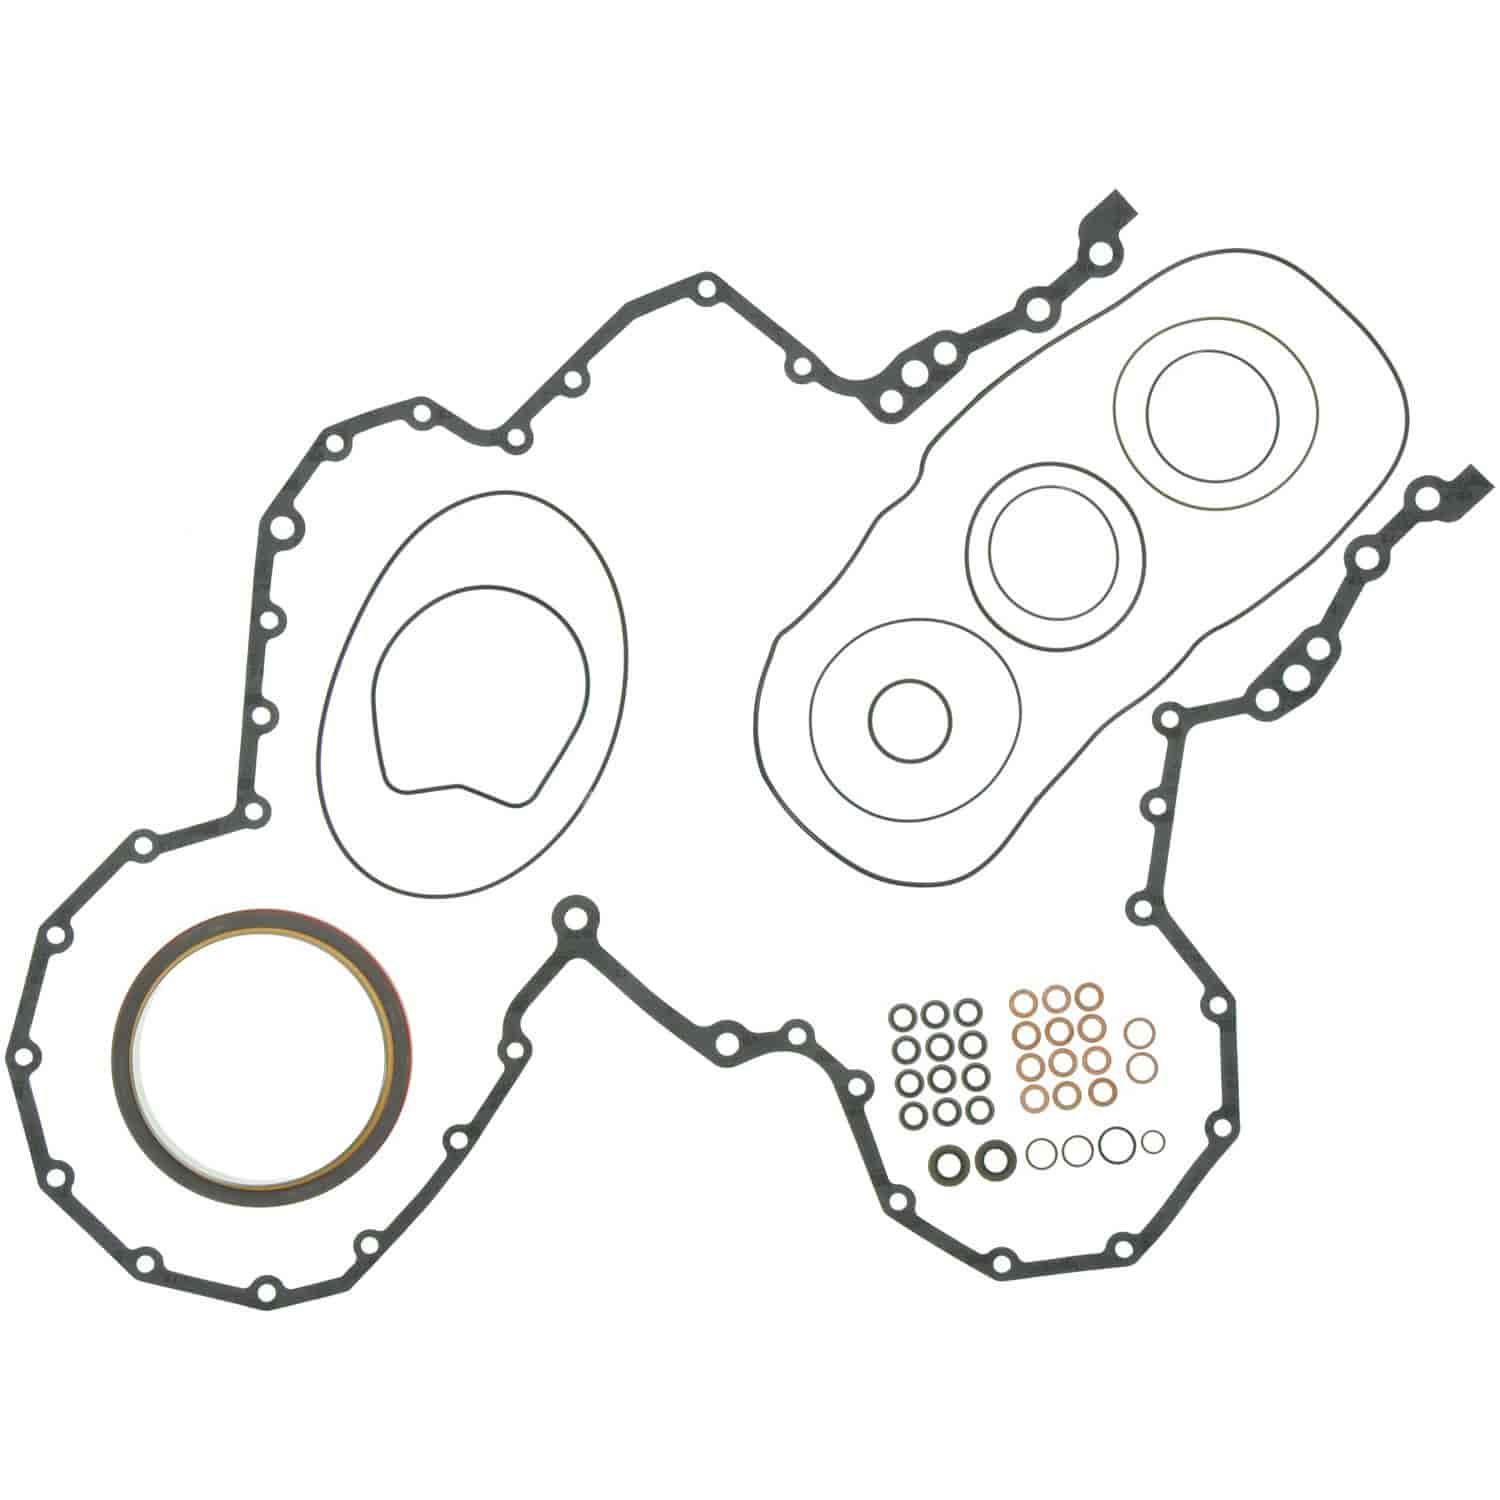 Timing Cover Set Caterpillar 3406E Front Cover Set.